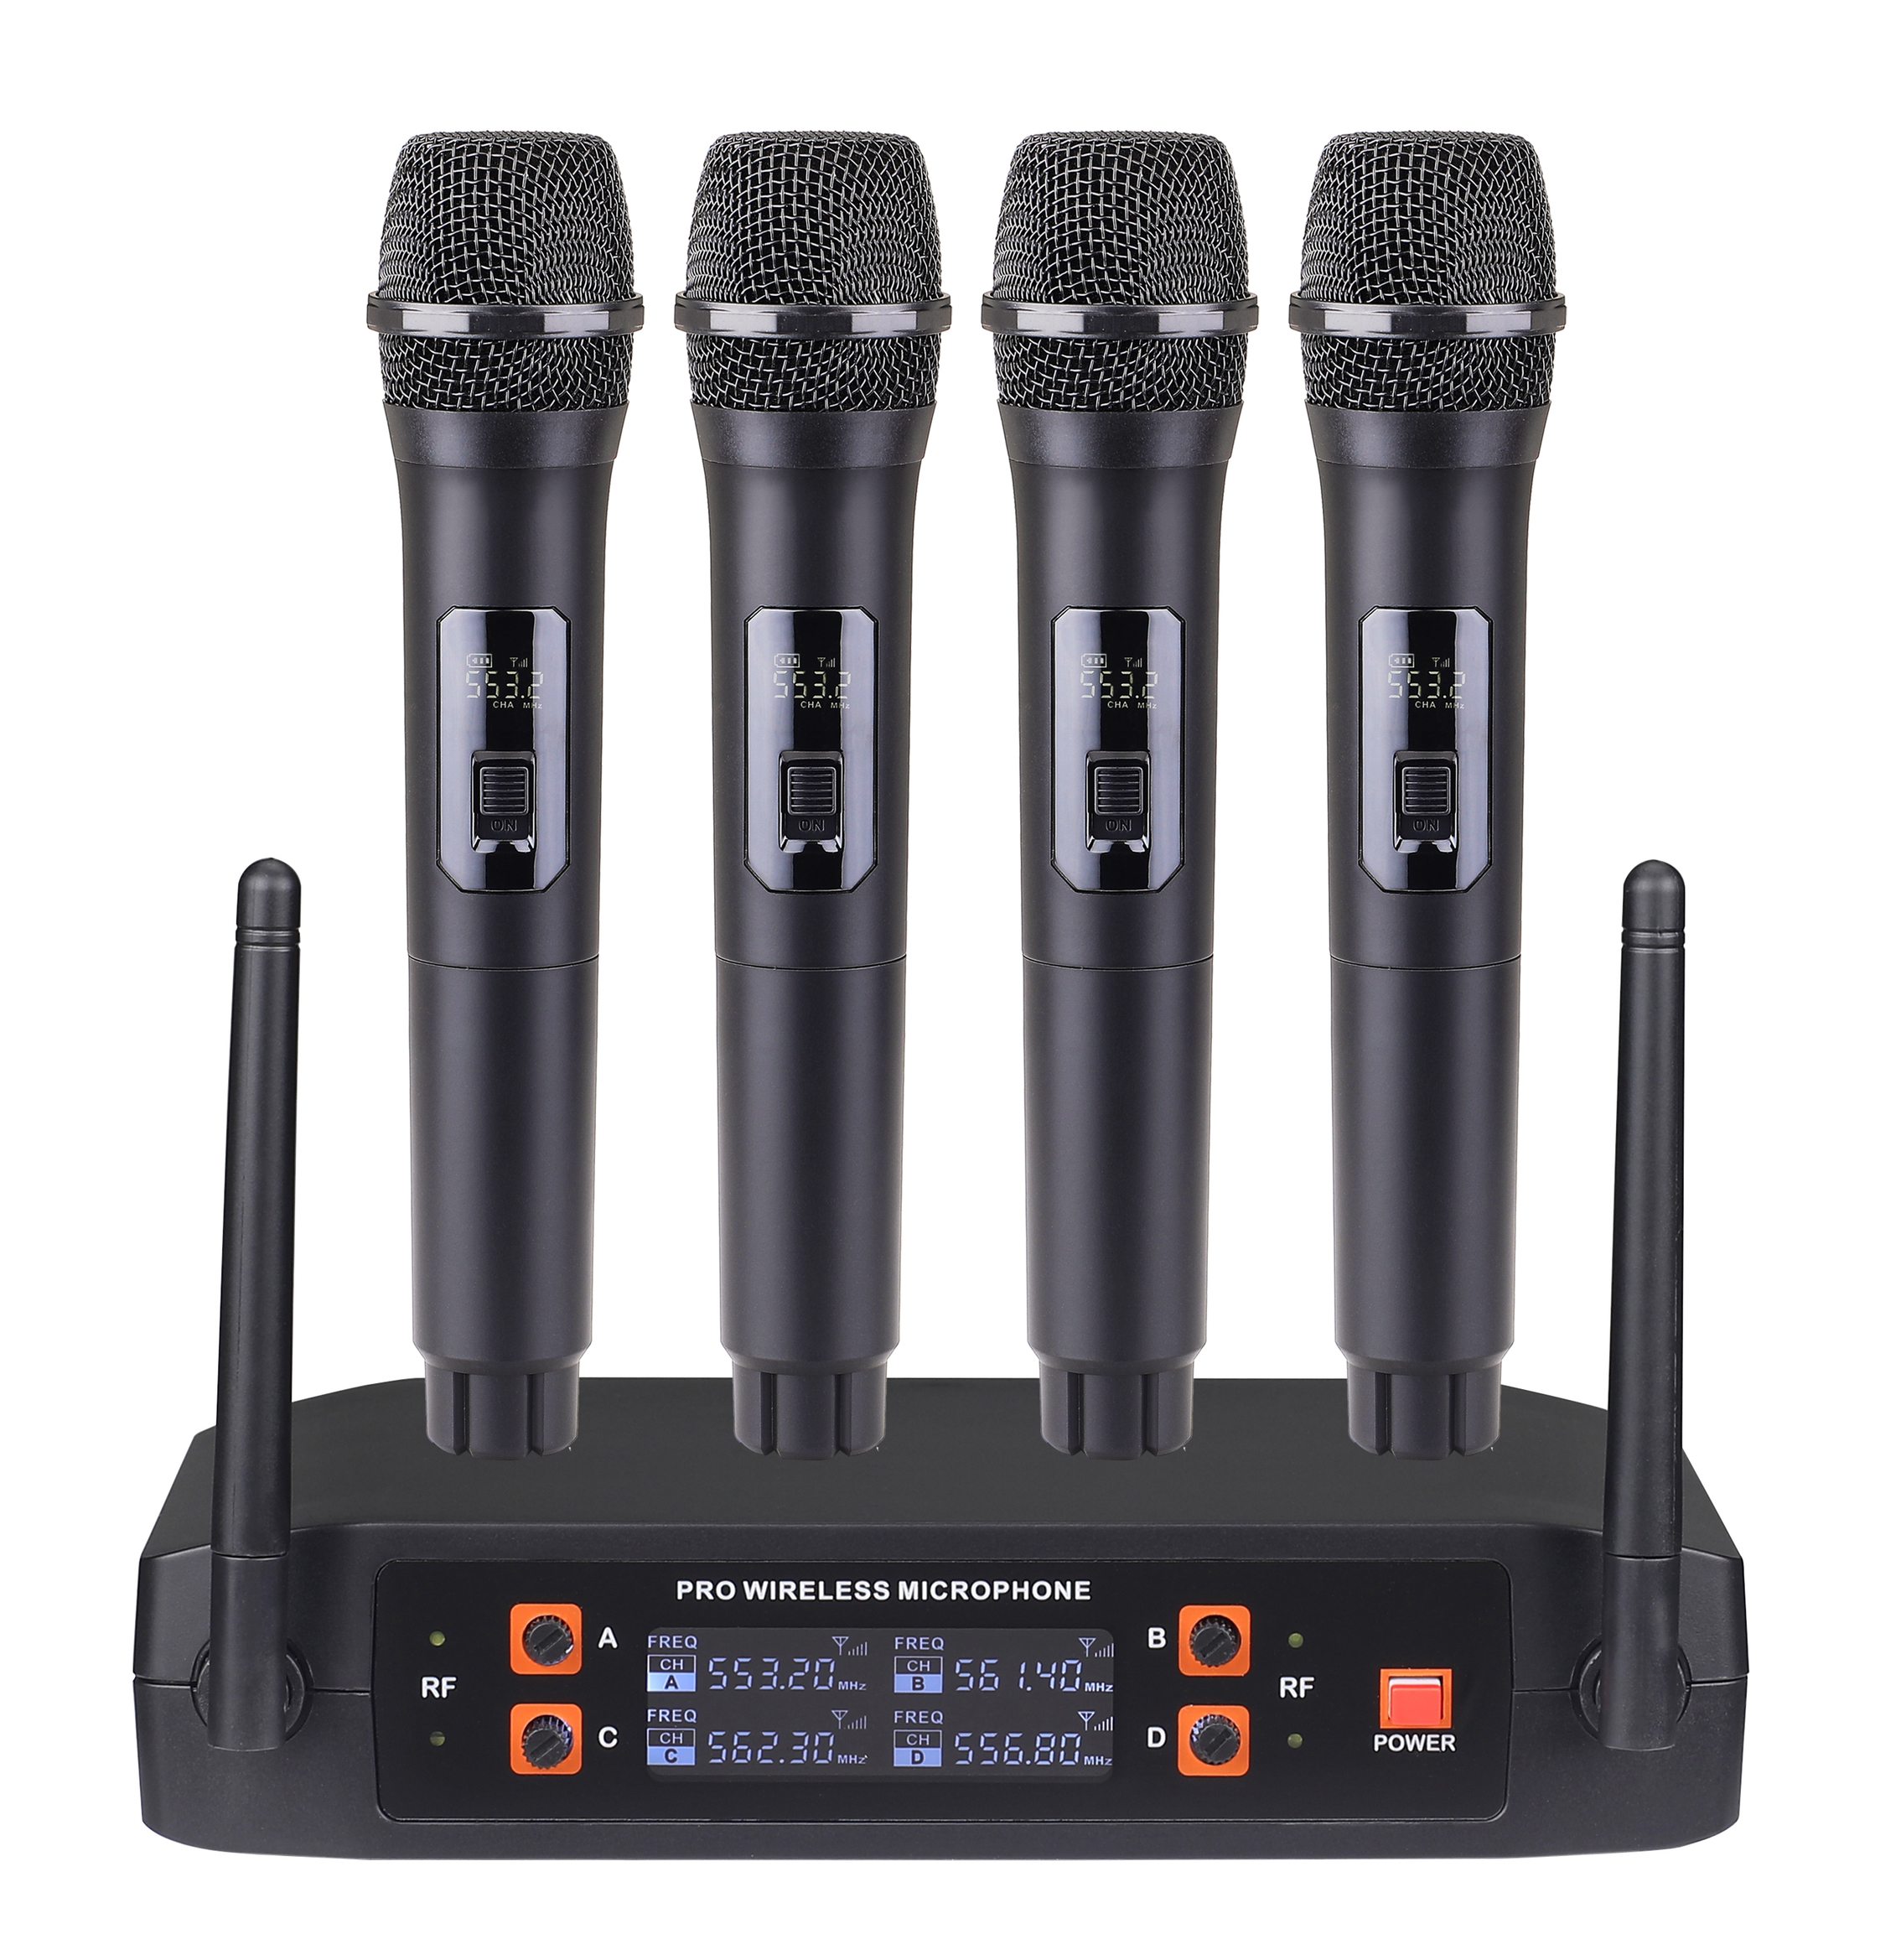 JS-140 four in one wireless microphone Digital Professional UHF Wireless Microphone Mic System